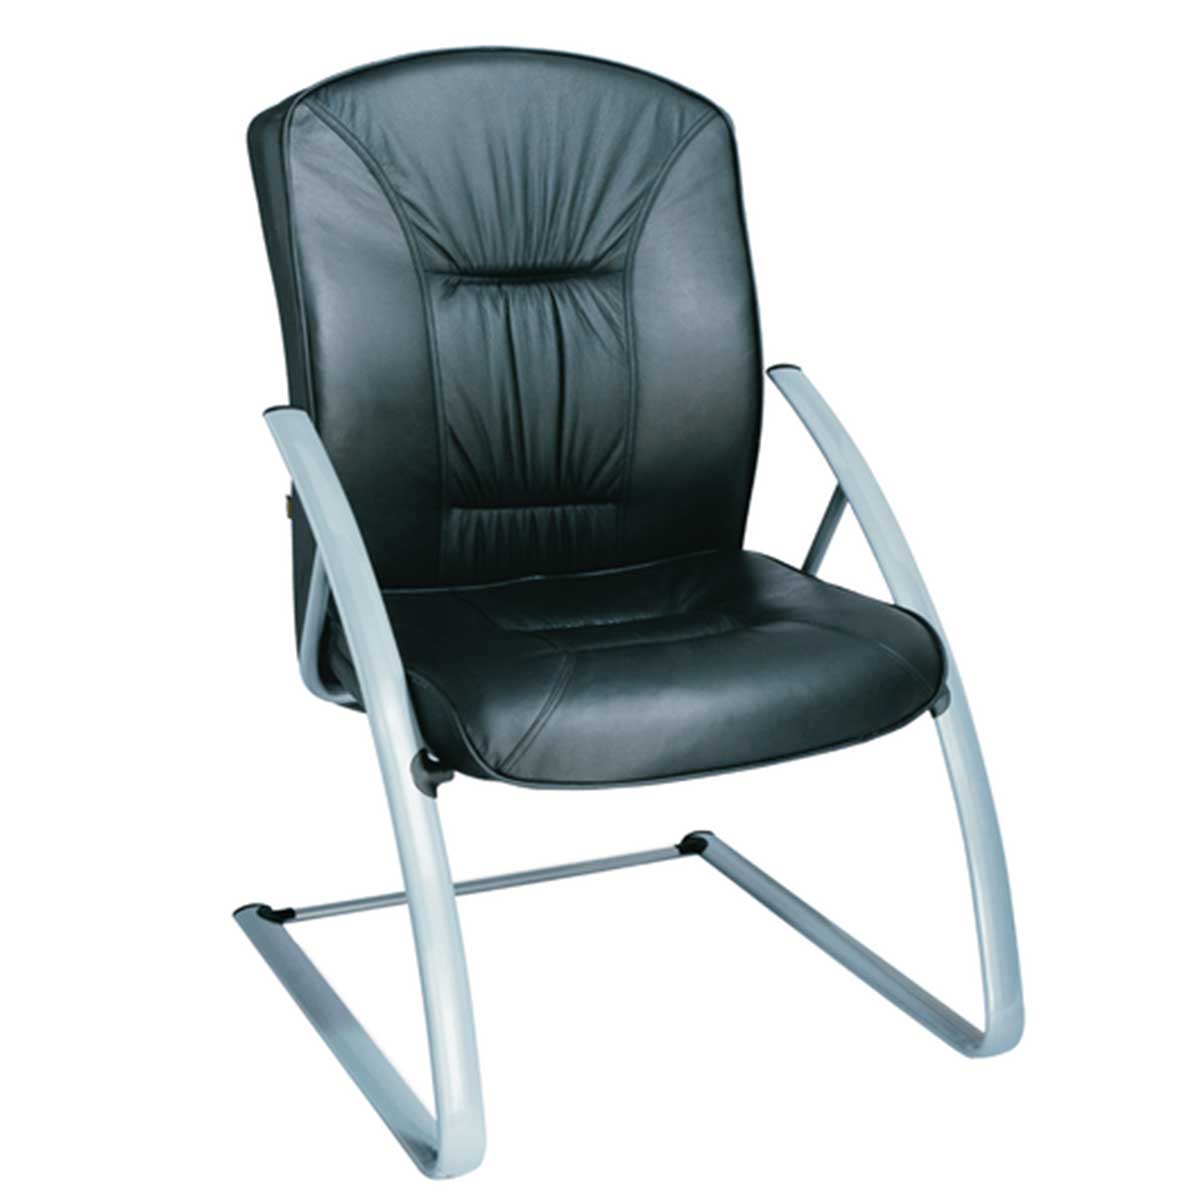 Leather office chair Manufacturers, Suppliers in Janakpuri